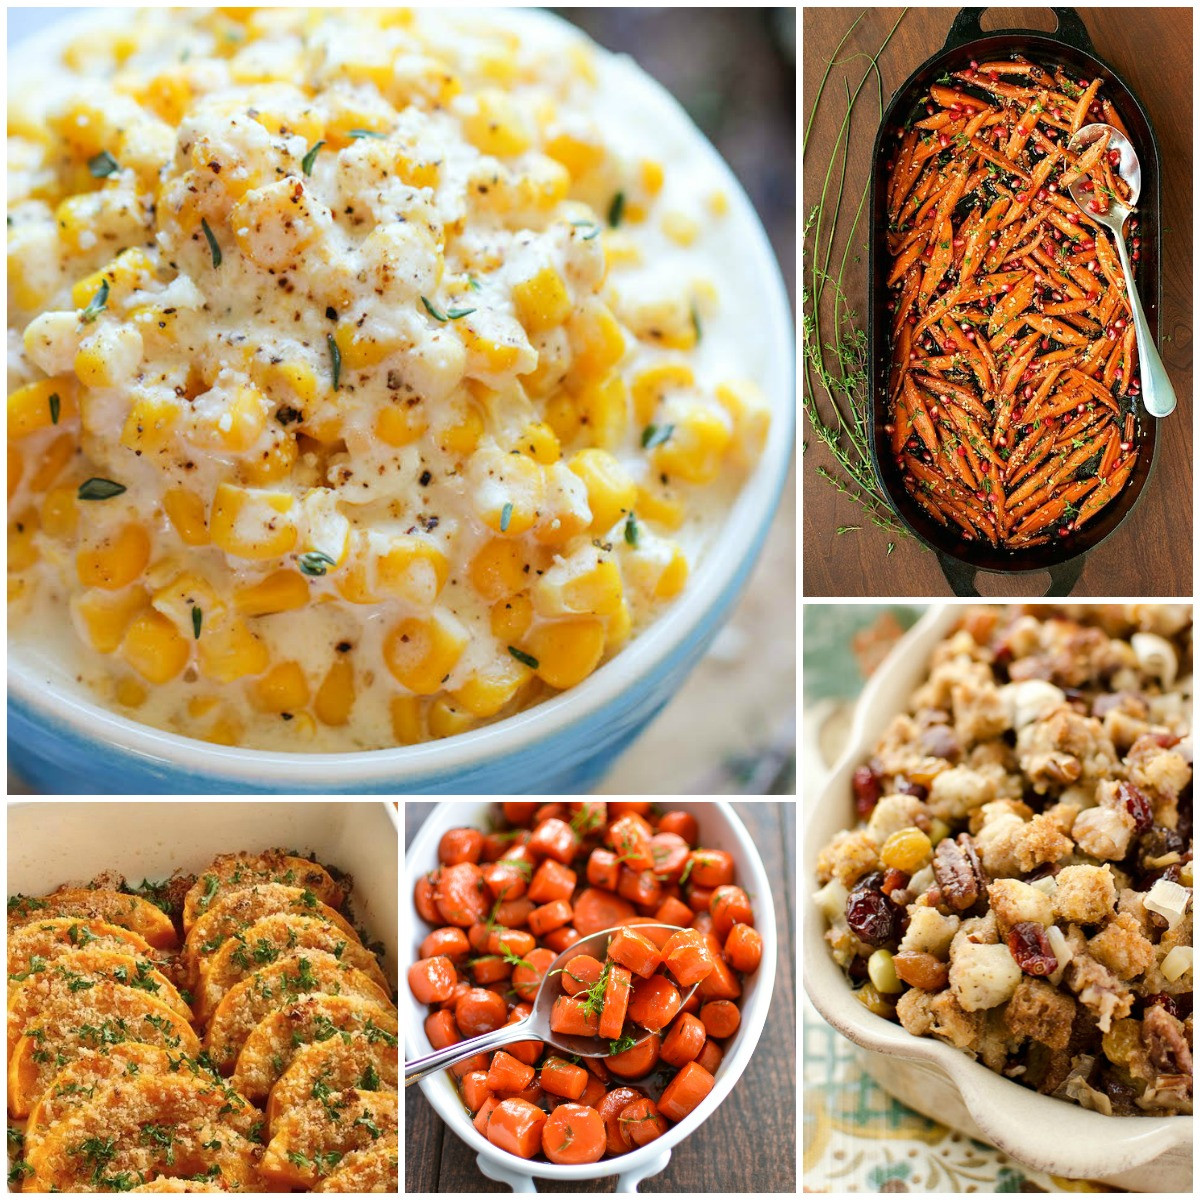 Thanksgiving Recipes Side Dishes
 25 Most Pinned Side Dish Recipes for Thanksgiving and